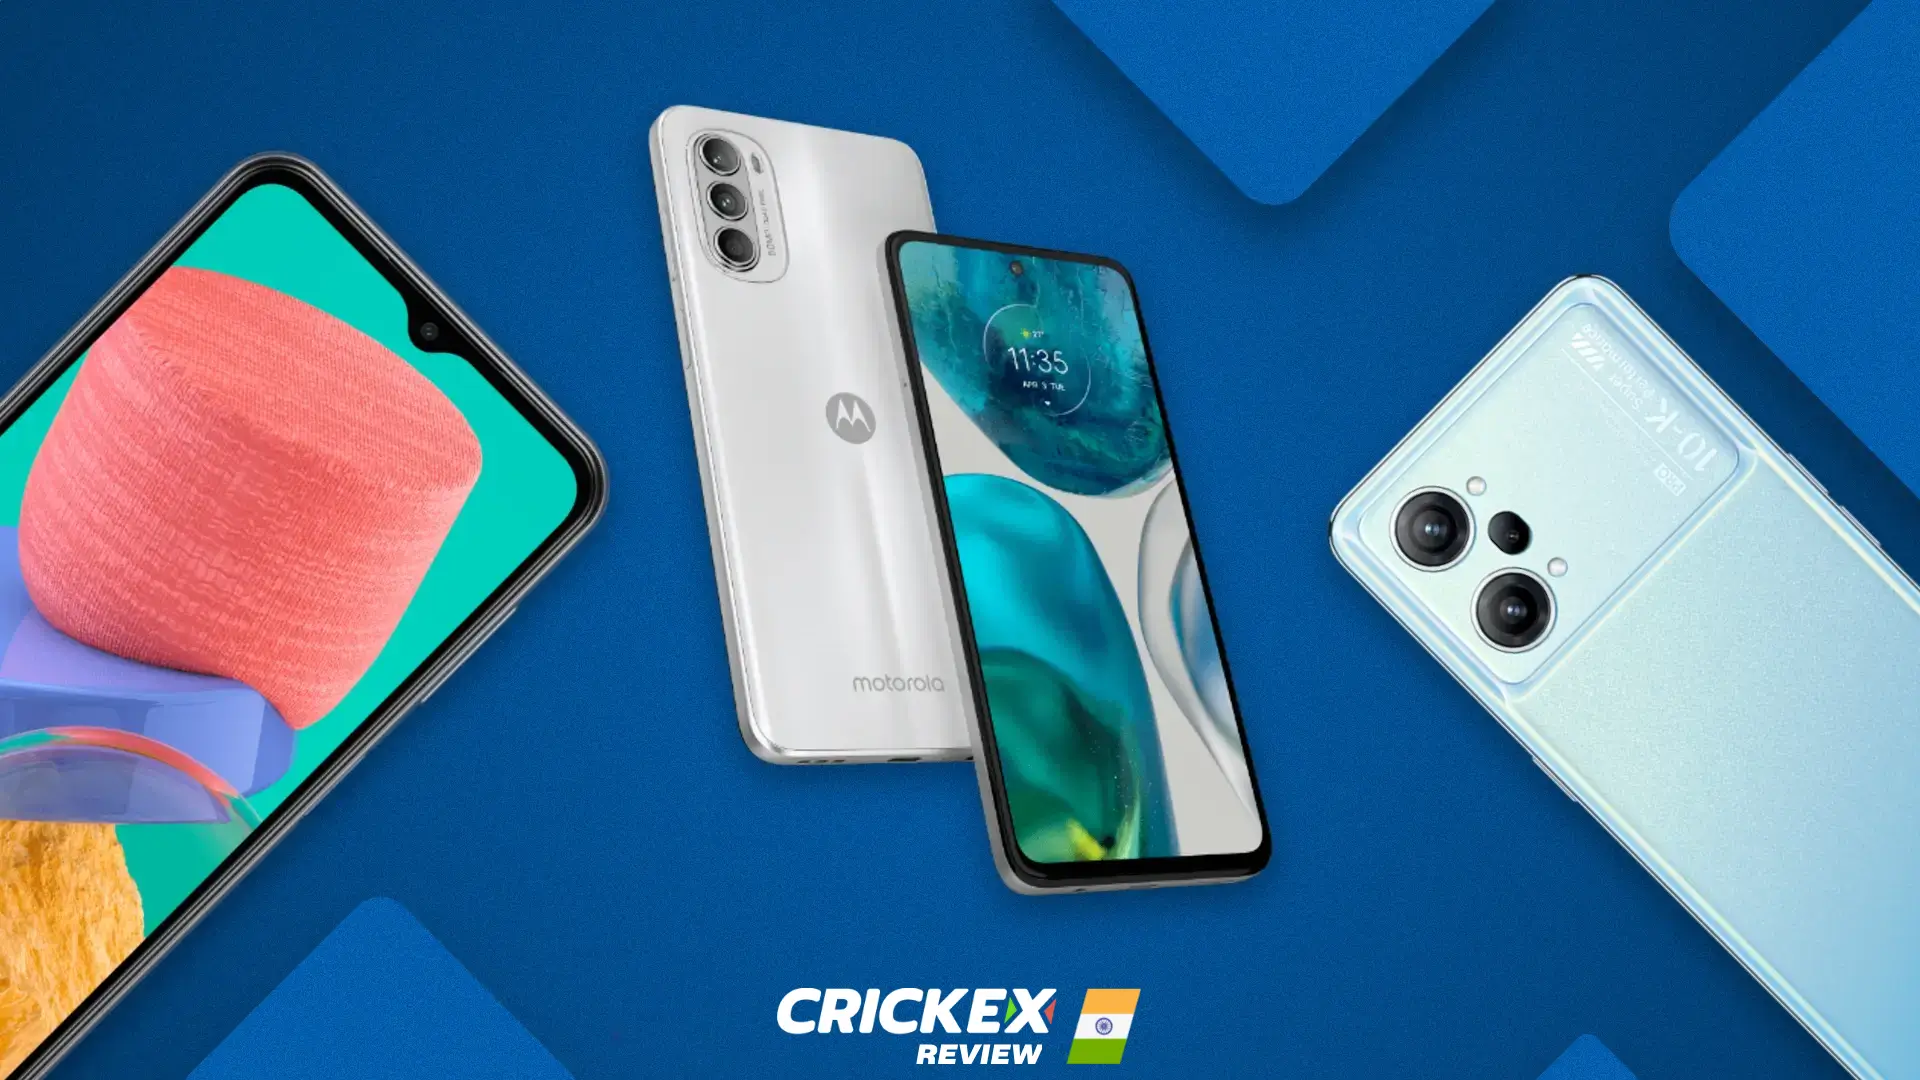 Smartphones that support the crickex sports betting app